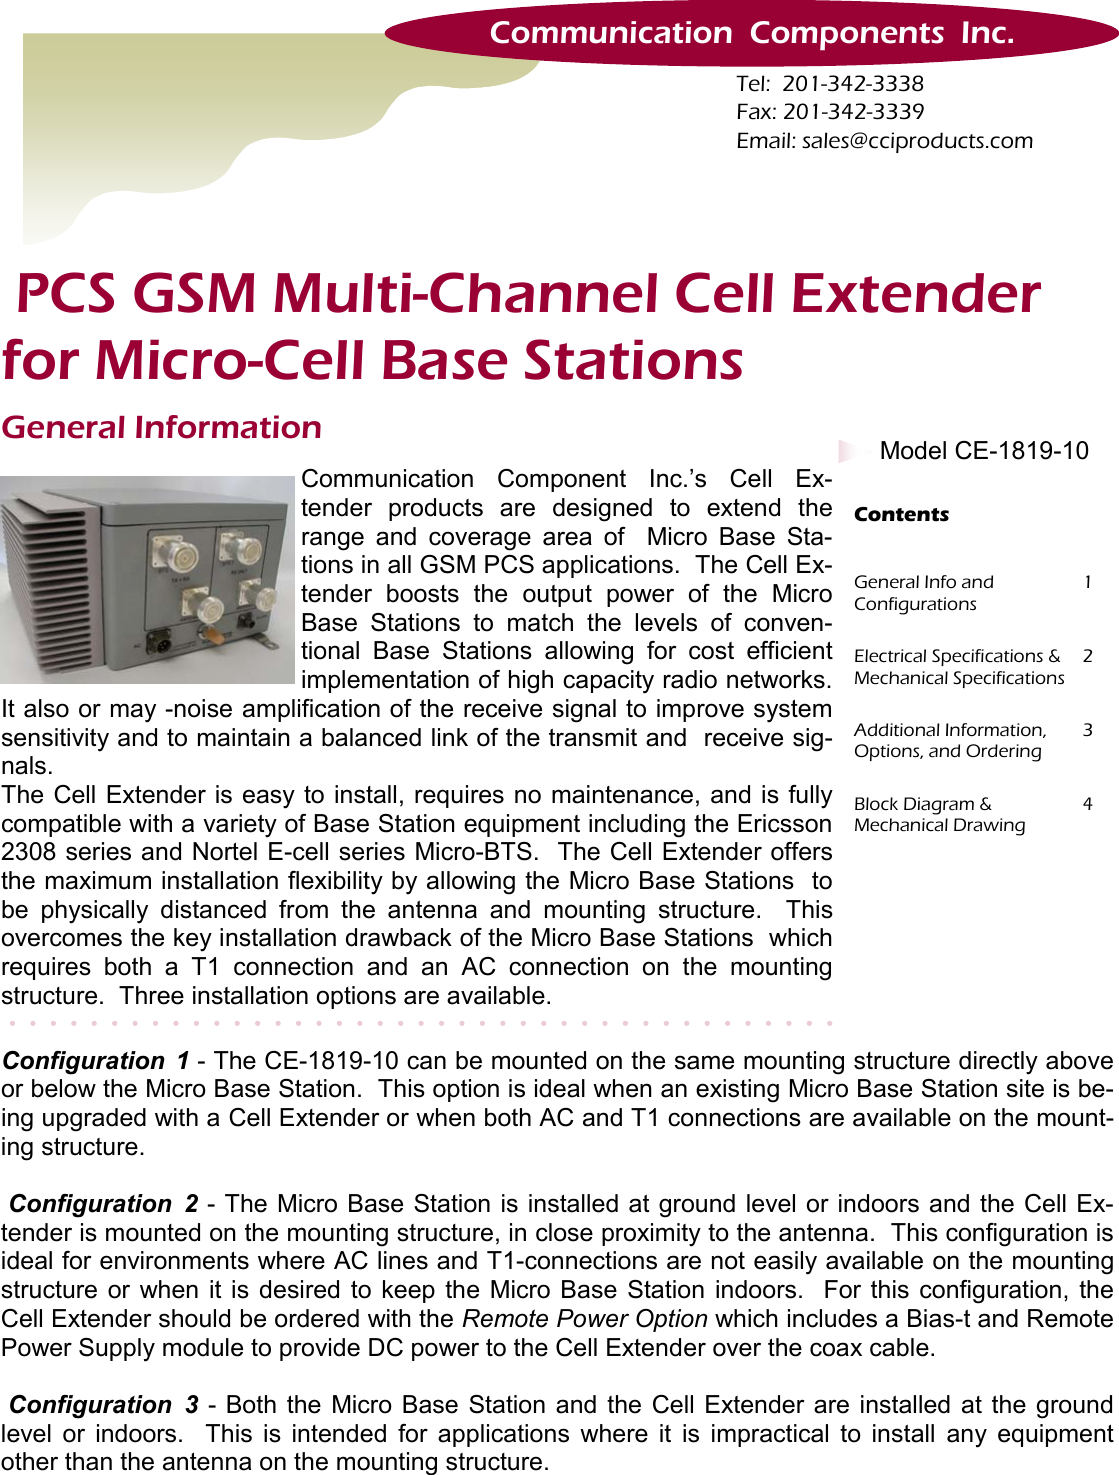 General Information Communication Component Inc.’s Cell Ex-tender products are designed to extend the range and coverage area of  Micro Base Sta-tions in all GSM PCS applications.  The Cell Ex-tender boosts the output power of the Micro Base Stations to match the levels of conven-tional Base Stations allowing for cost efficient implementation of high capacity radio networks.  It also or may -noise amplification of the receive signal to improve system sensitivity and to maintain a balanced link of the transmit and  receive sig-nals.  The Cell Extender is easy to install, requires no maintenance, and is fully compatible with a variety of Base Station equipment including the Ericsson 2308 series and Nortel E-cell series Micro-BTS.  The Cell Extender offers the maximum installation flexibility by allowing the Micro Base Stations  to be physically distanced from the antenna and mounting structure.  This overcomes the key installation drawback of the Micro Base Stations  which requires both a T1 connection and an AC connection on the mounting structure.  Three installation options are available. General Info and    Configurations 1 Electrical Specifications &amp; Mechanical Specifications 2 Additional Information, Options, and Ordering 3 Block Diagram &amp;  Mechanical Drawing 4 Contents Configuration 1 - The CE-1819-10 can be mounted on the same mounting structure directly above or below the Micro Base Station.  This option is ideal when an existing Micro Base Station site is be-ing upgraded with a Cell Extender or when both AC and T1 connections are available on the mount-ing structure.     Configuration 2 - The Micro Base Station is installed at ground level or indoors and the Cell Ex-tender is mounted on the mounting structure, in close proximity to the antenna.  This configuration is ideal for environments where AC lines and T1-connections are not easily available on the mounting structure or when it is desired to keep the Micro Base Station indoors.  For this configuration, the Cell Extender should be ordered with the Remote Power Option which includes a Bias-t and Remote Power Supply module to provide DC power to the Cell Extender over the coax cable.   Configuration 3 - Both the Micro Base Station and the Cell Extender are installed at the ground level or indoors.  This is intended for applications where it is impractical to install any equipment other than the antenna on the mounting structure. Tel:  201-342-3338 Fax: 201-342-3339 Email: sales@cciproducts.com Communication  Components  Inc.  PCS GSM Multi-Channel Cell Extender  for Micro-Cell Base Stations Model CE-1819-10  